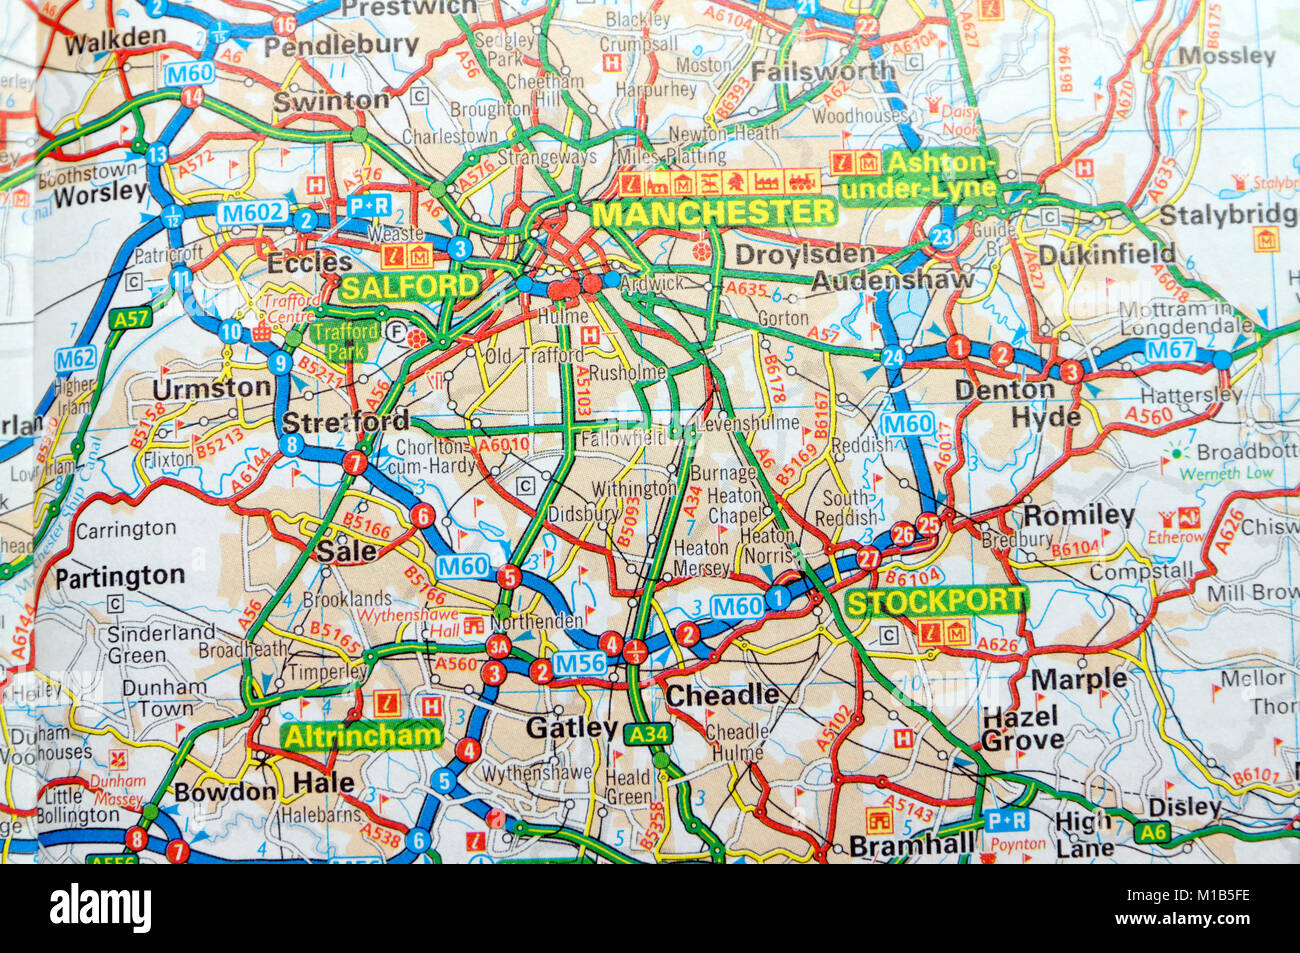 Road Map of Manchester,England. Stock Photo